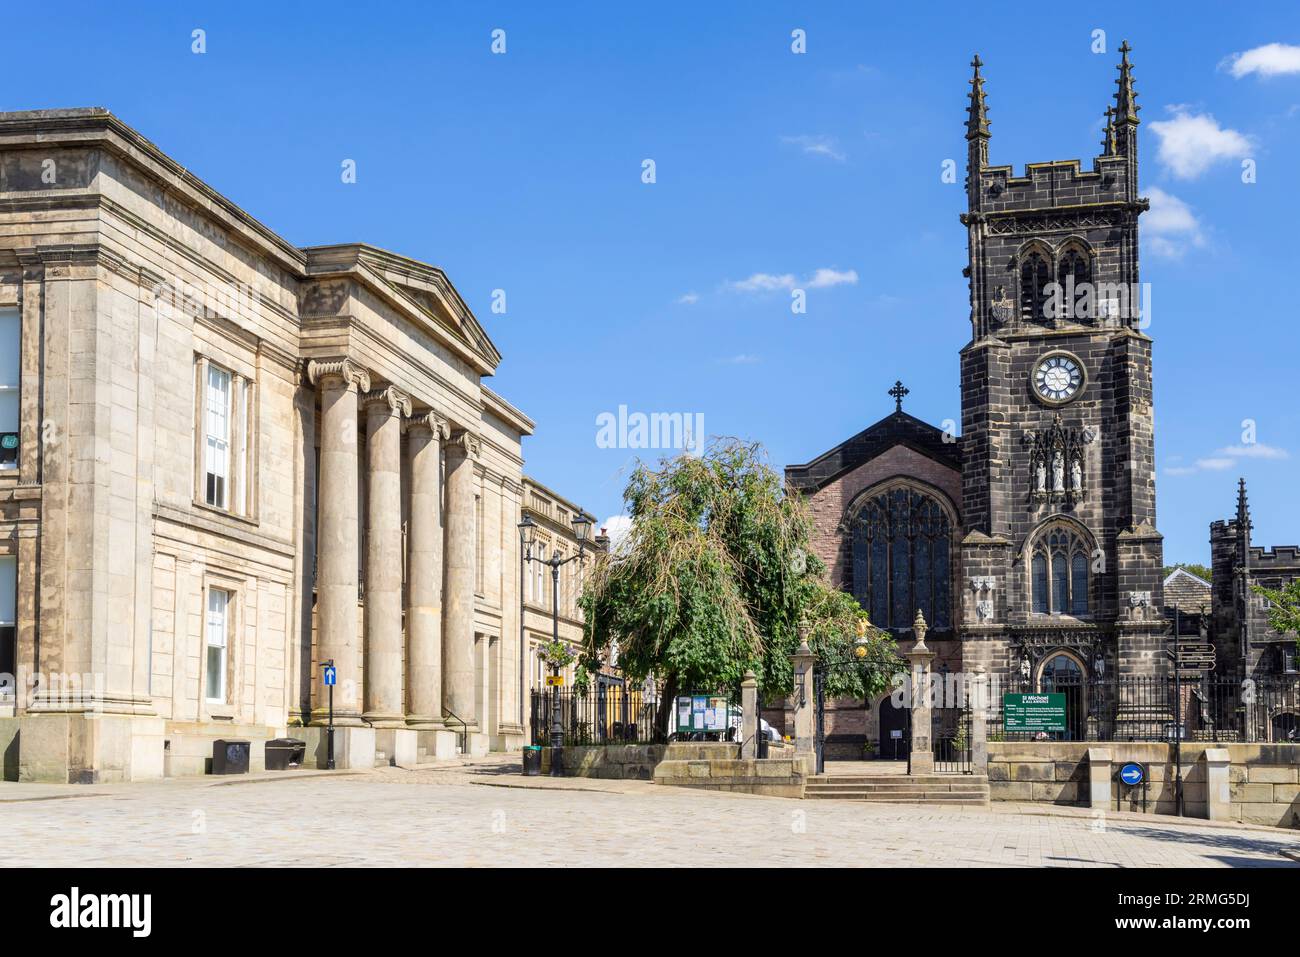 Macclesfield Town Hall Macclesfield and St Michael and All Angels Church Macclesfield Cheshire East England UK GB Europe Stock Photo